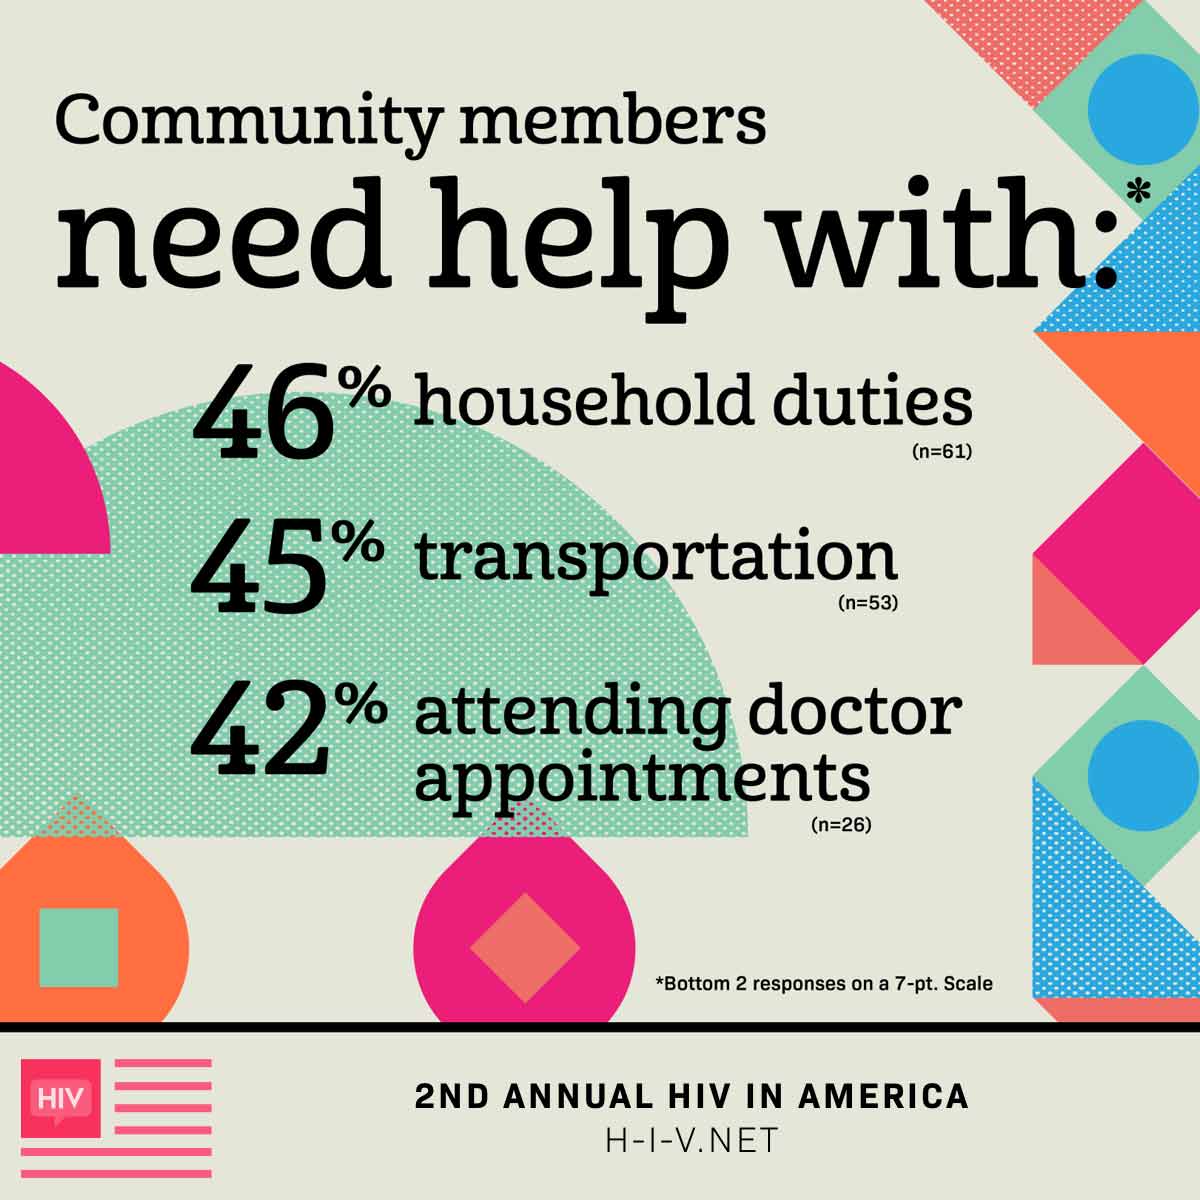 List of chores that community members need help with including household duties, transportation, and attending doctor appointments.